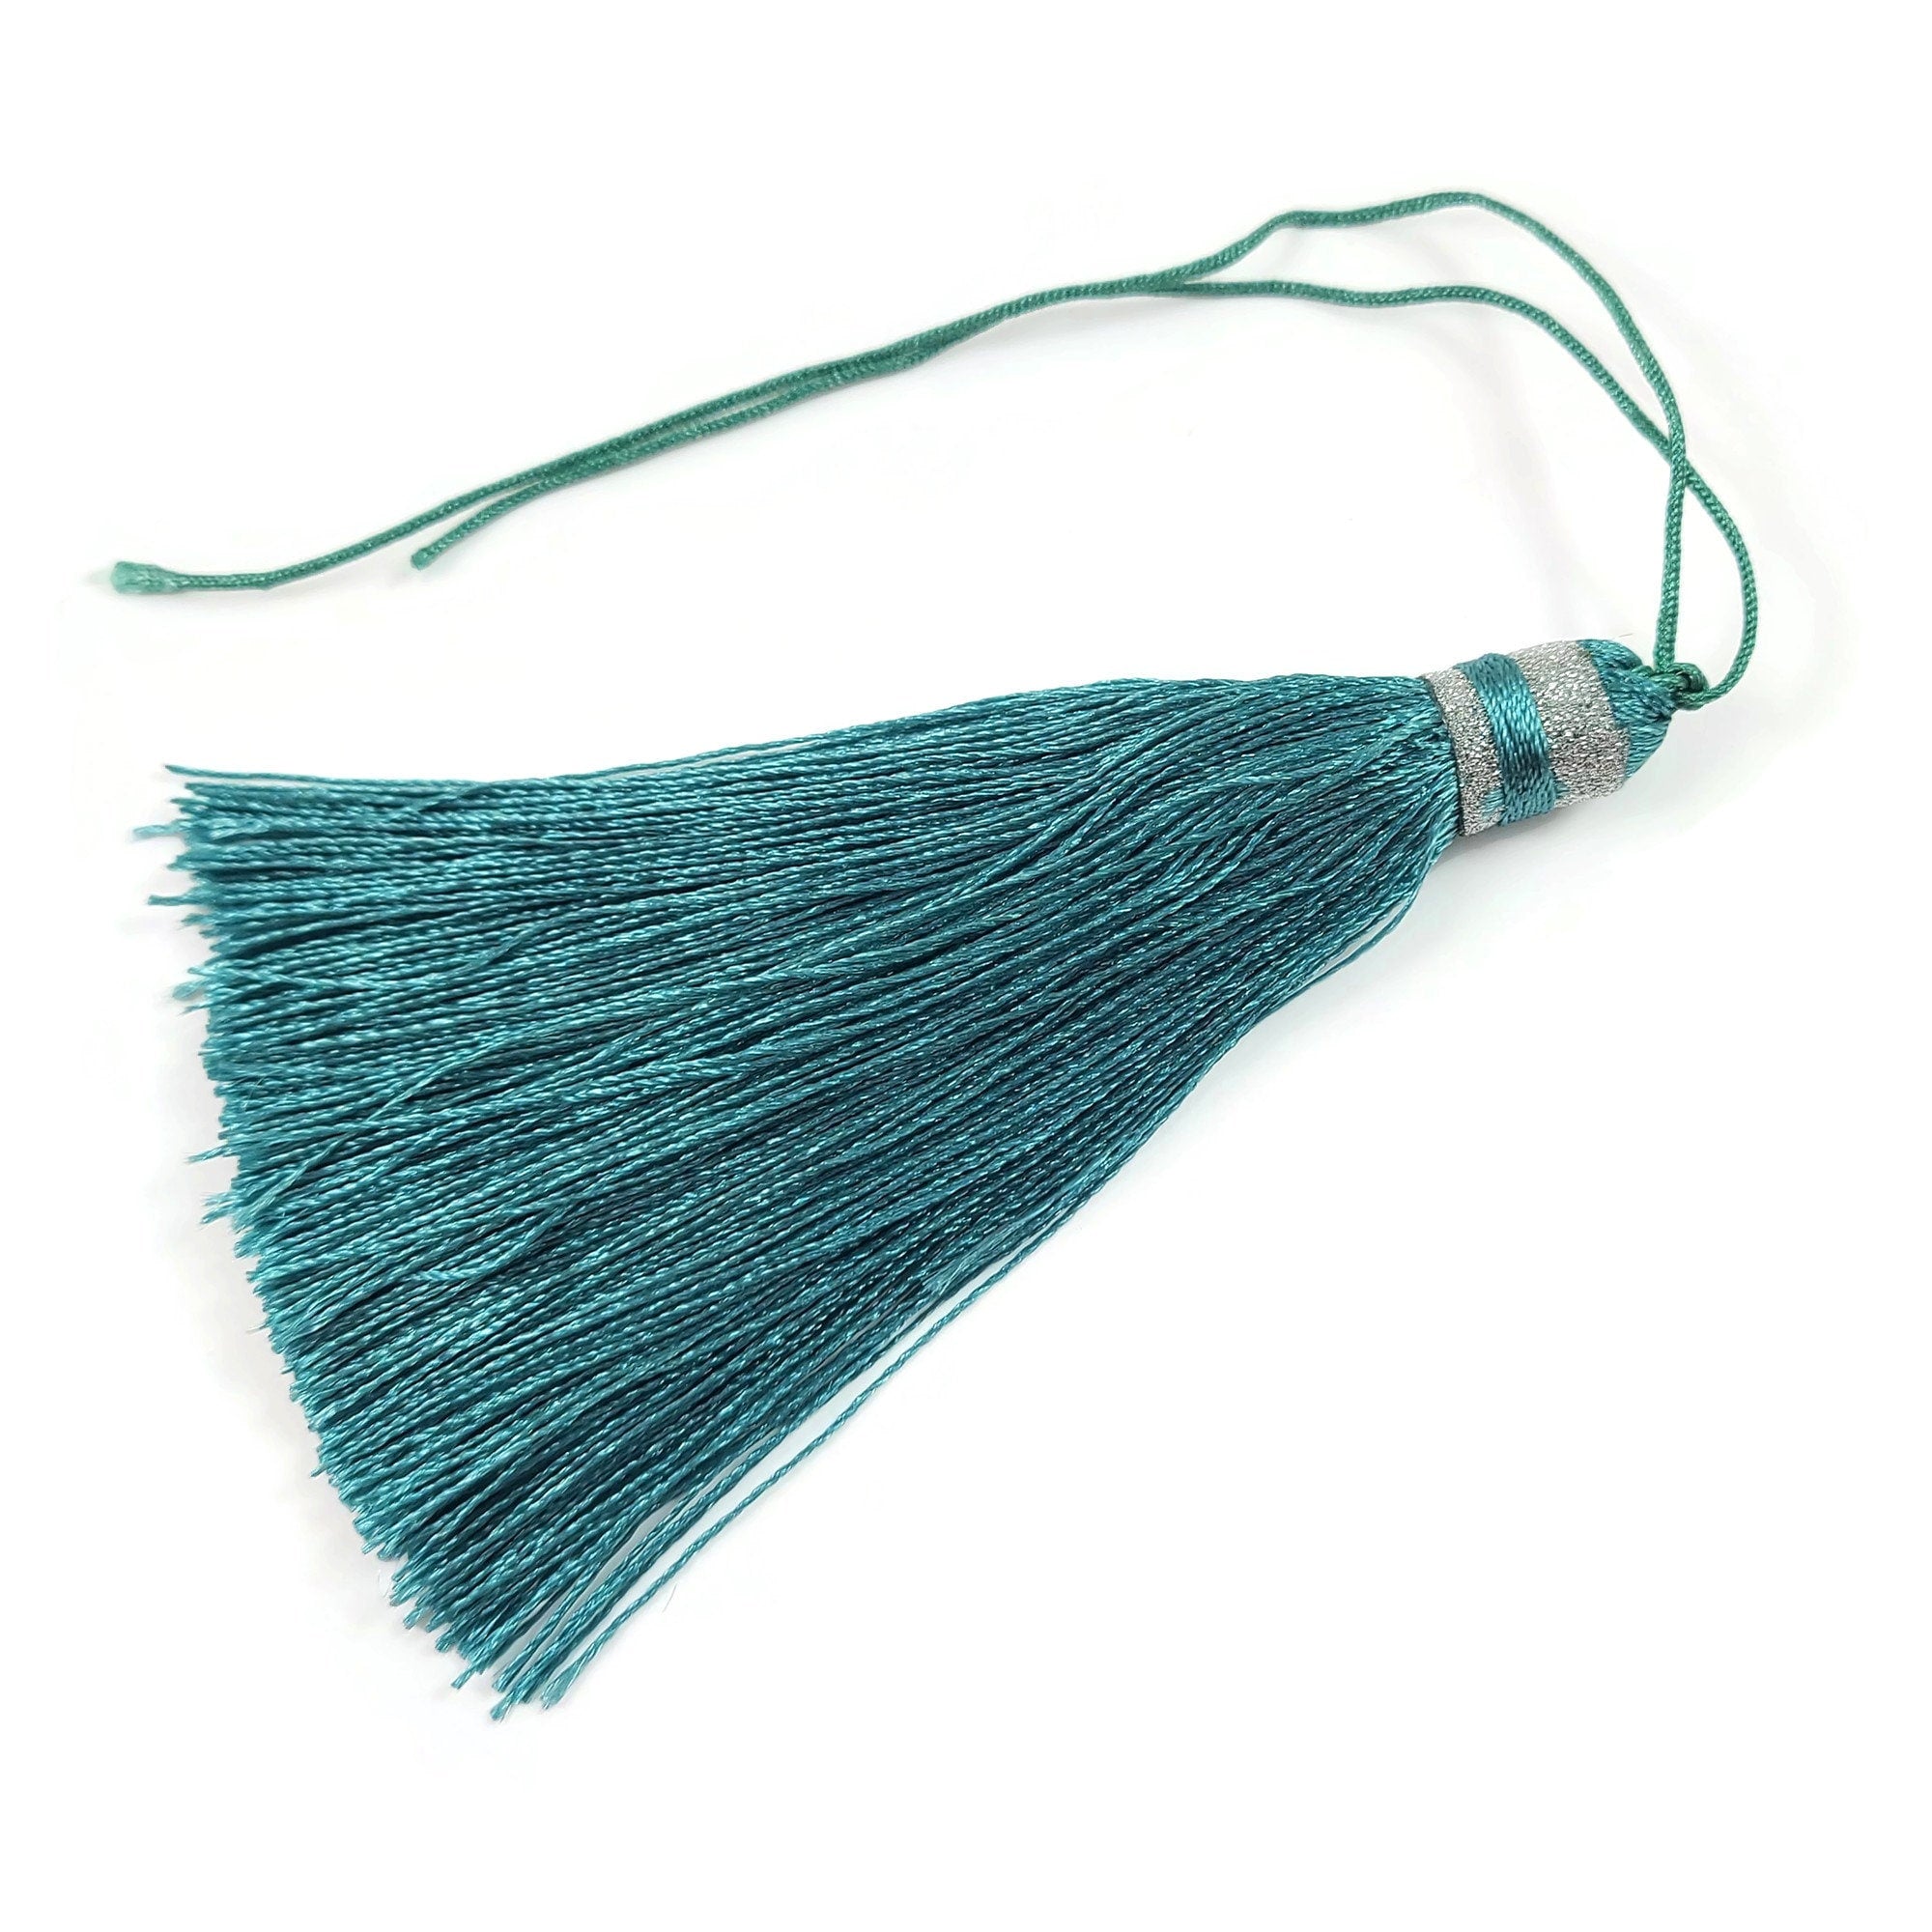 20pcs Tassels For Jewelry Making, 3.5 Inches Single Color Handmade